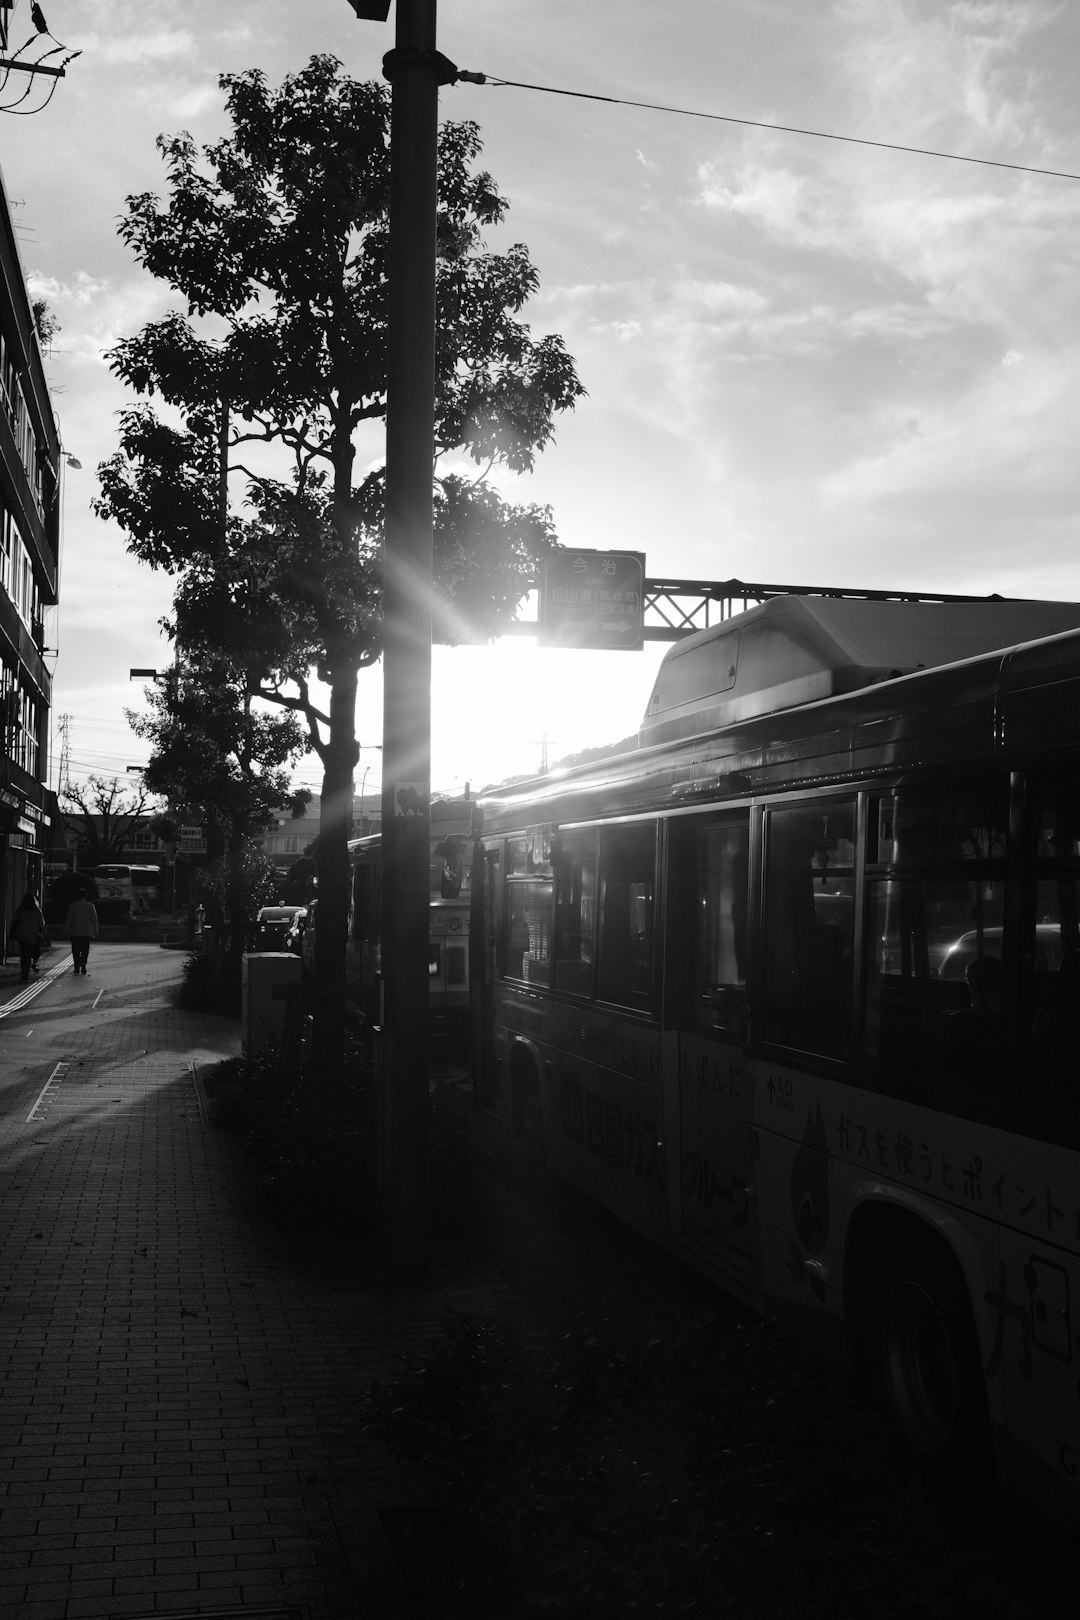 grayscale photo of bus on road